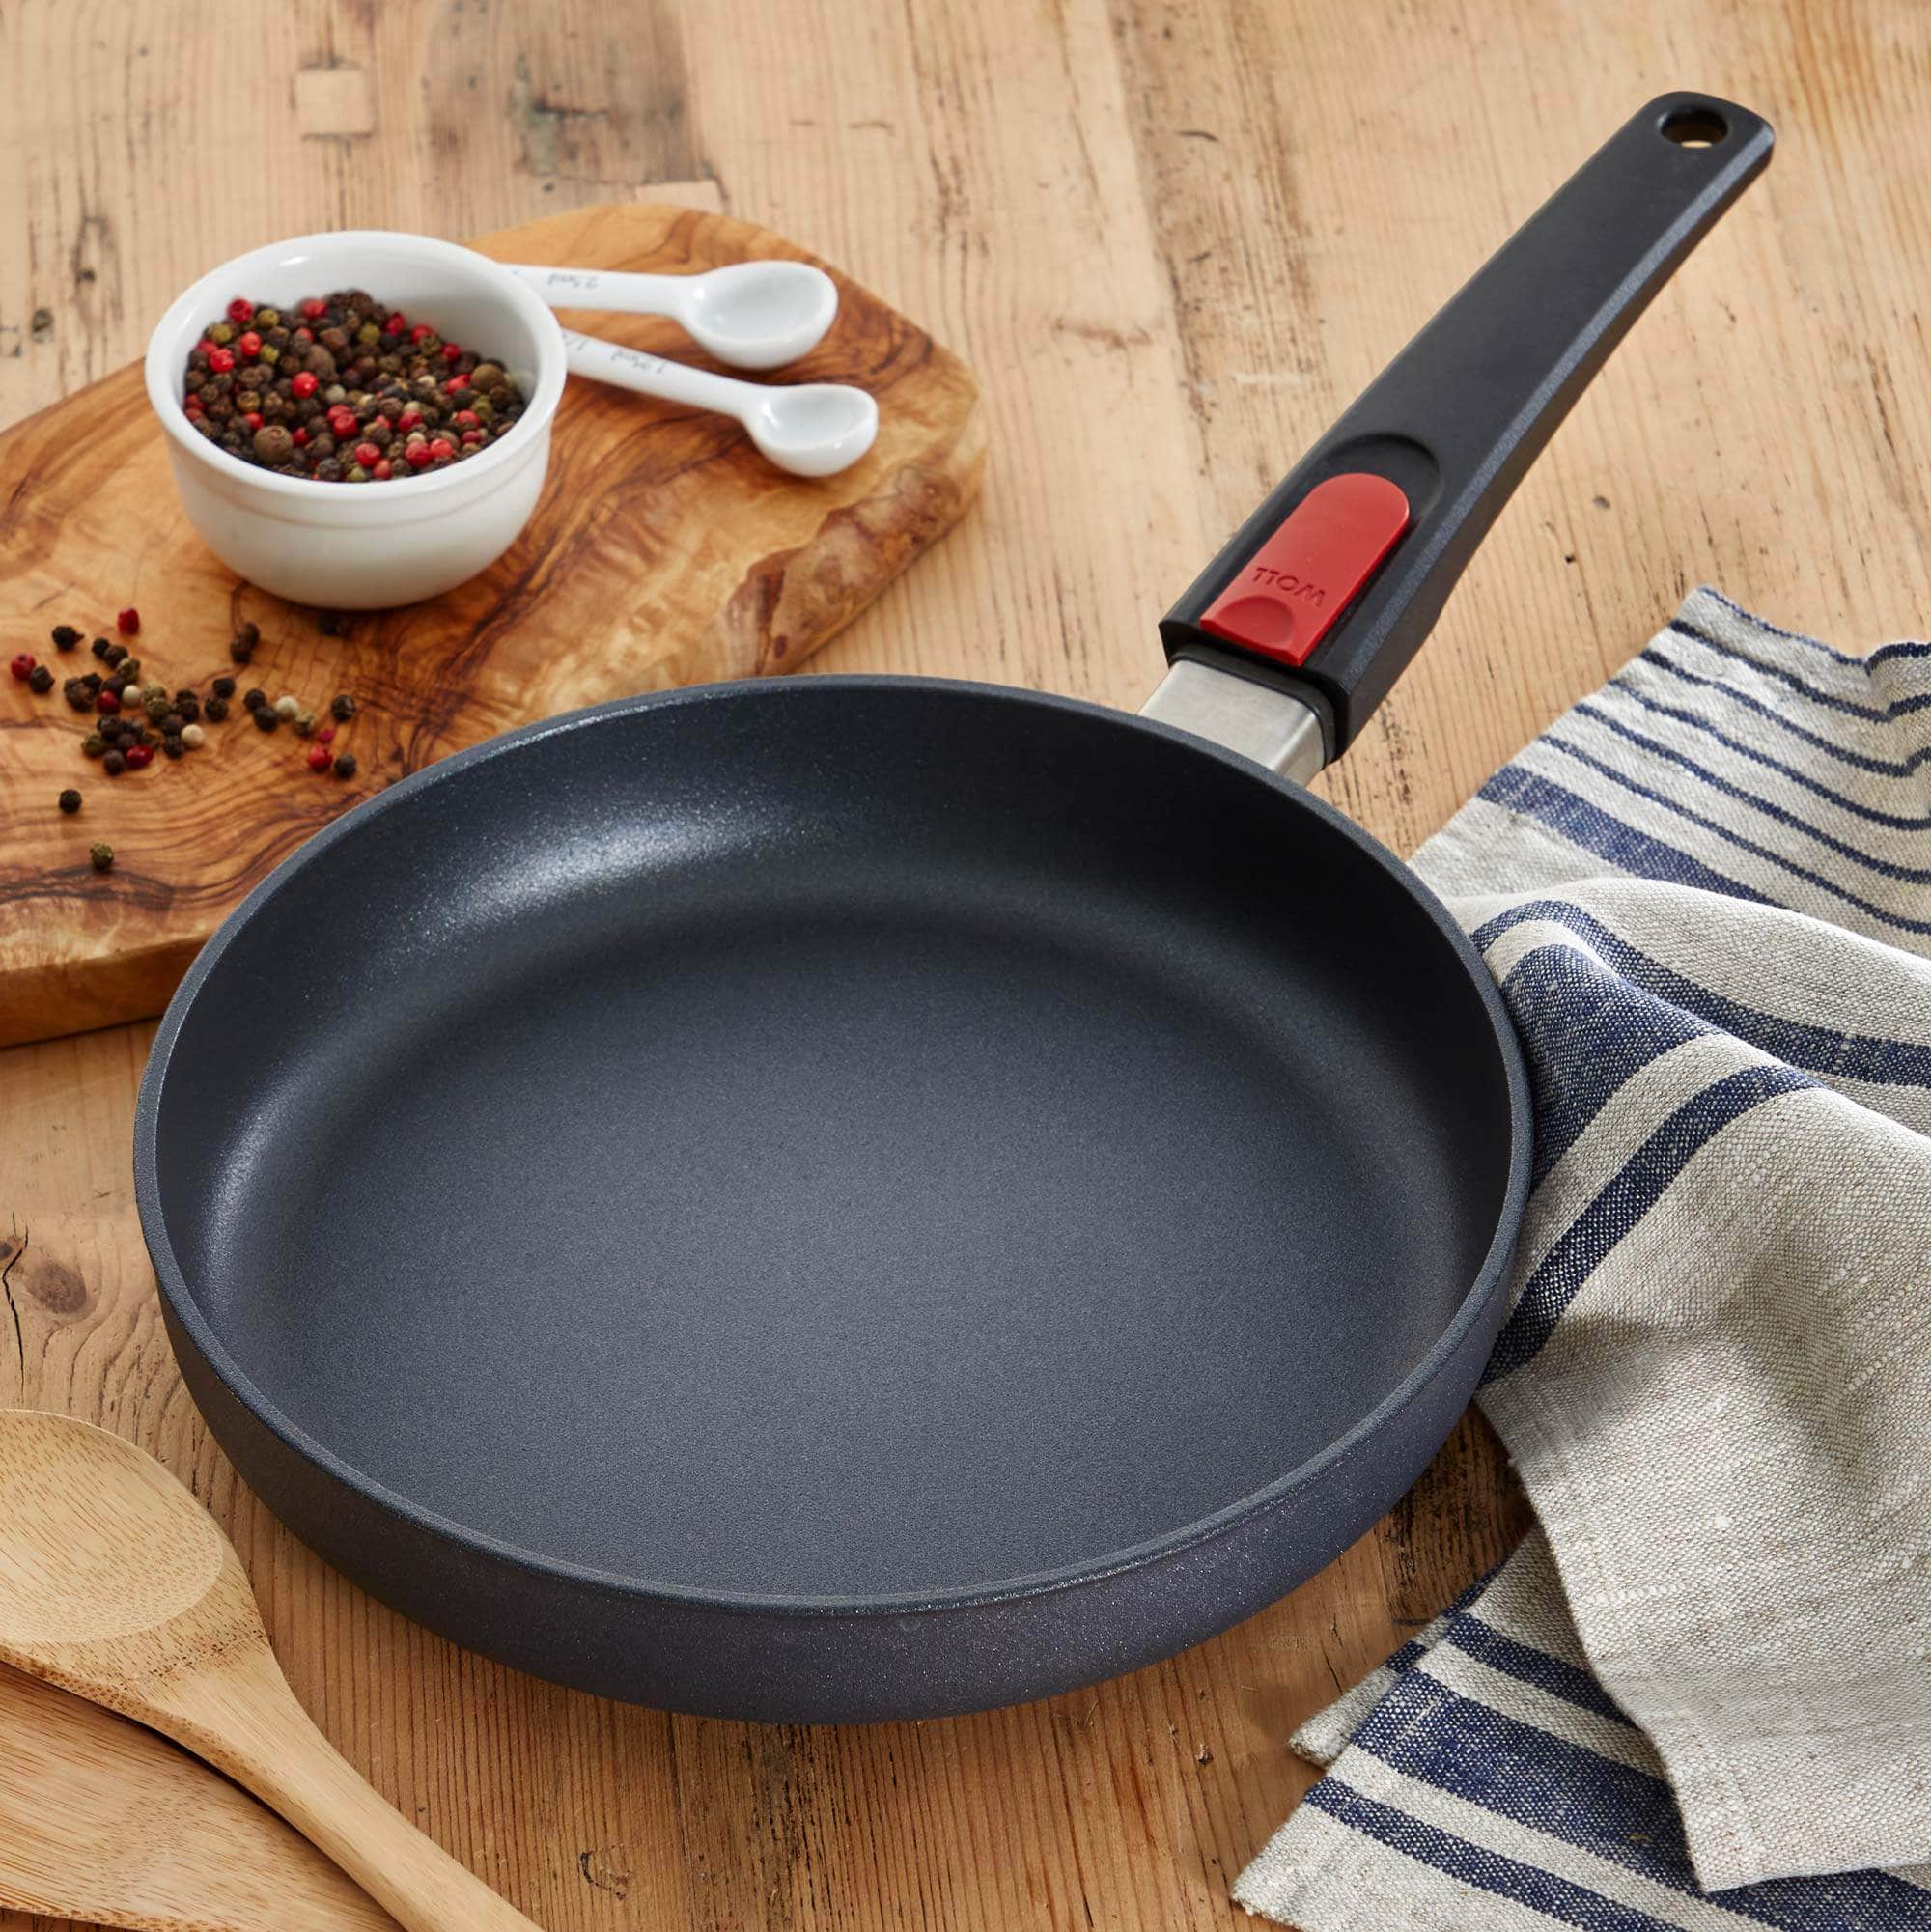 The best shallow frying pan  set for use with range cookers. Oven & dishwasher safe!